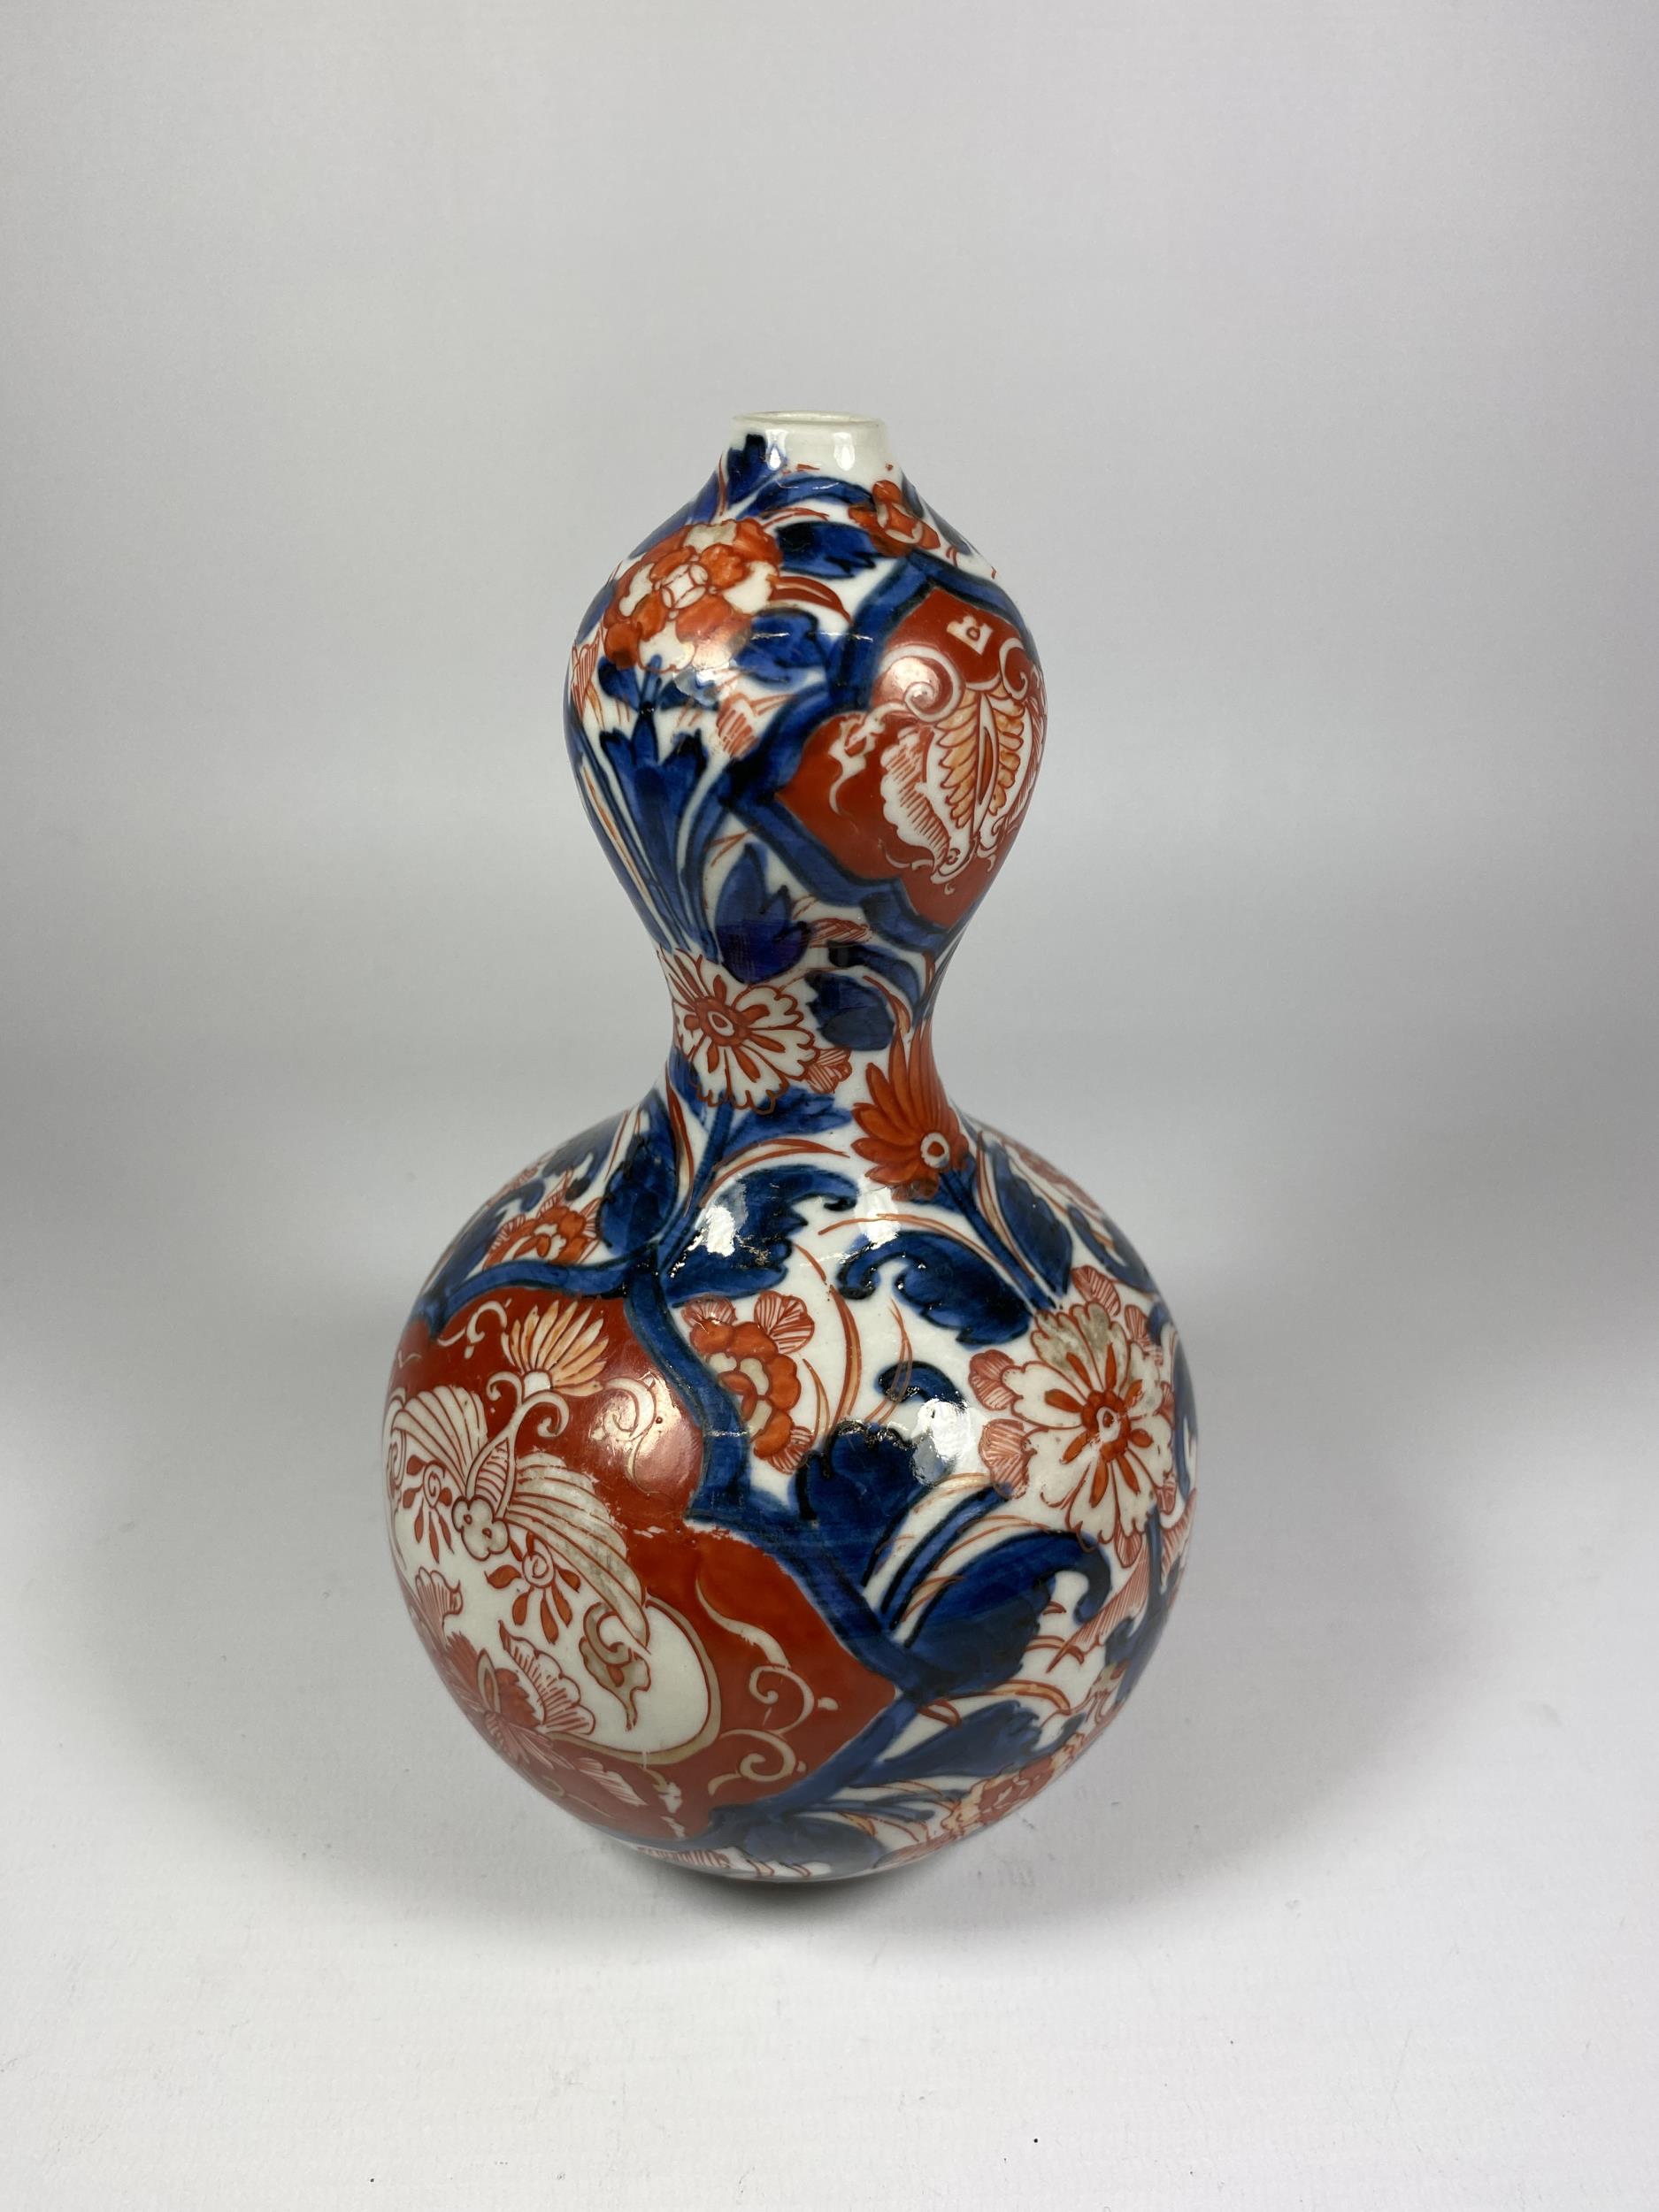 A JAPANESE IMARI MEIJI PERIOD (1868-1912) DOUBLE GOURD FORM BOTTLE VASE, HEIGHT 20CM - Image 3 of 5